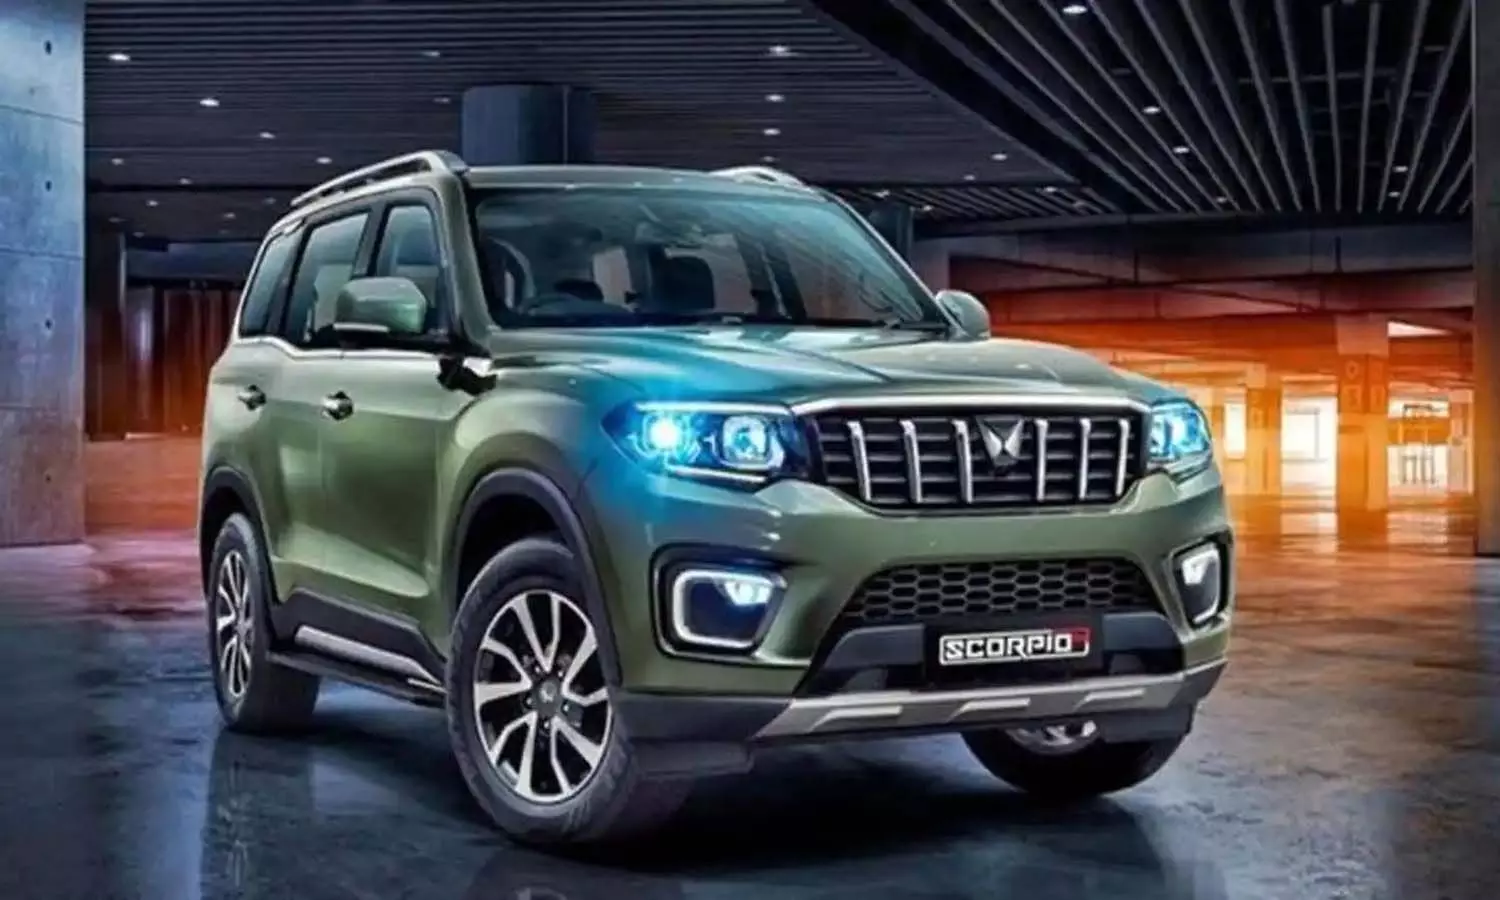 Mahindras new SUV, booking earns Rs 18 thousand crore in half an hour